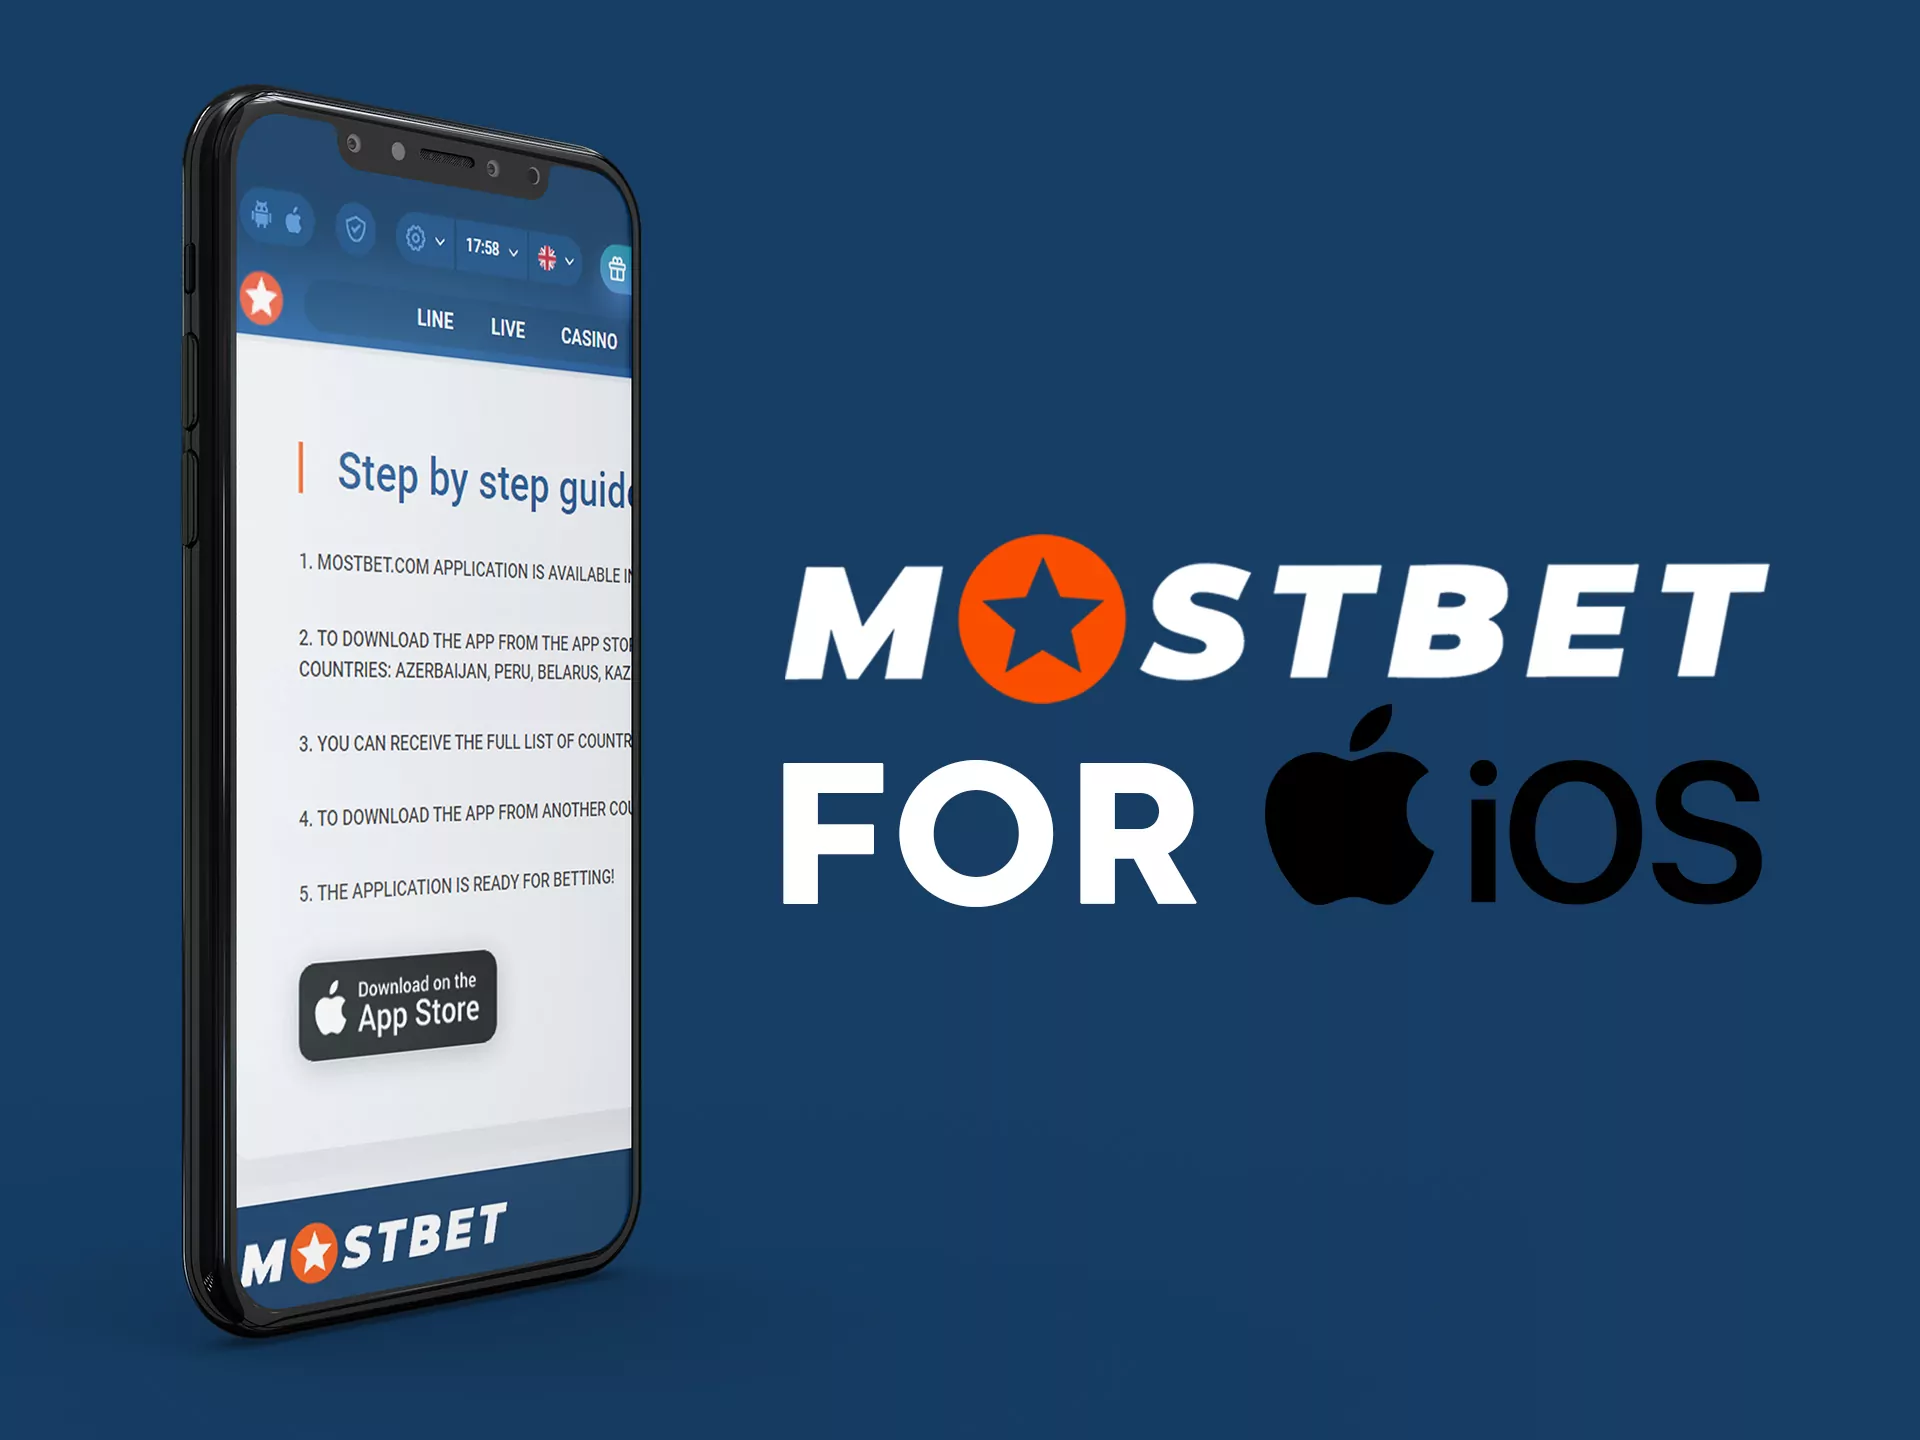 Mostbet has iOS app for download.